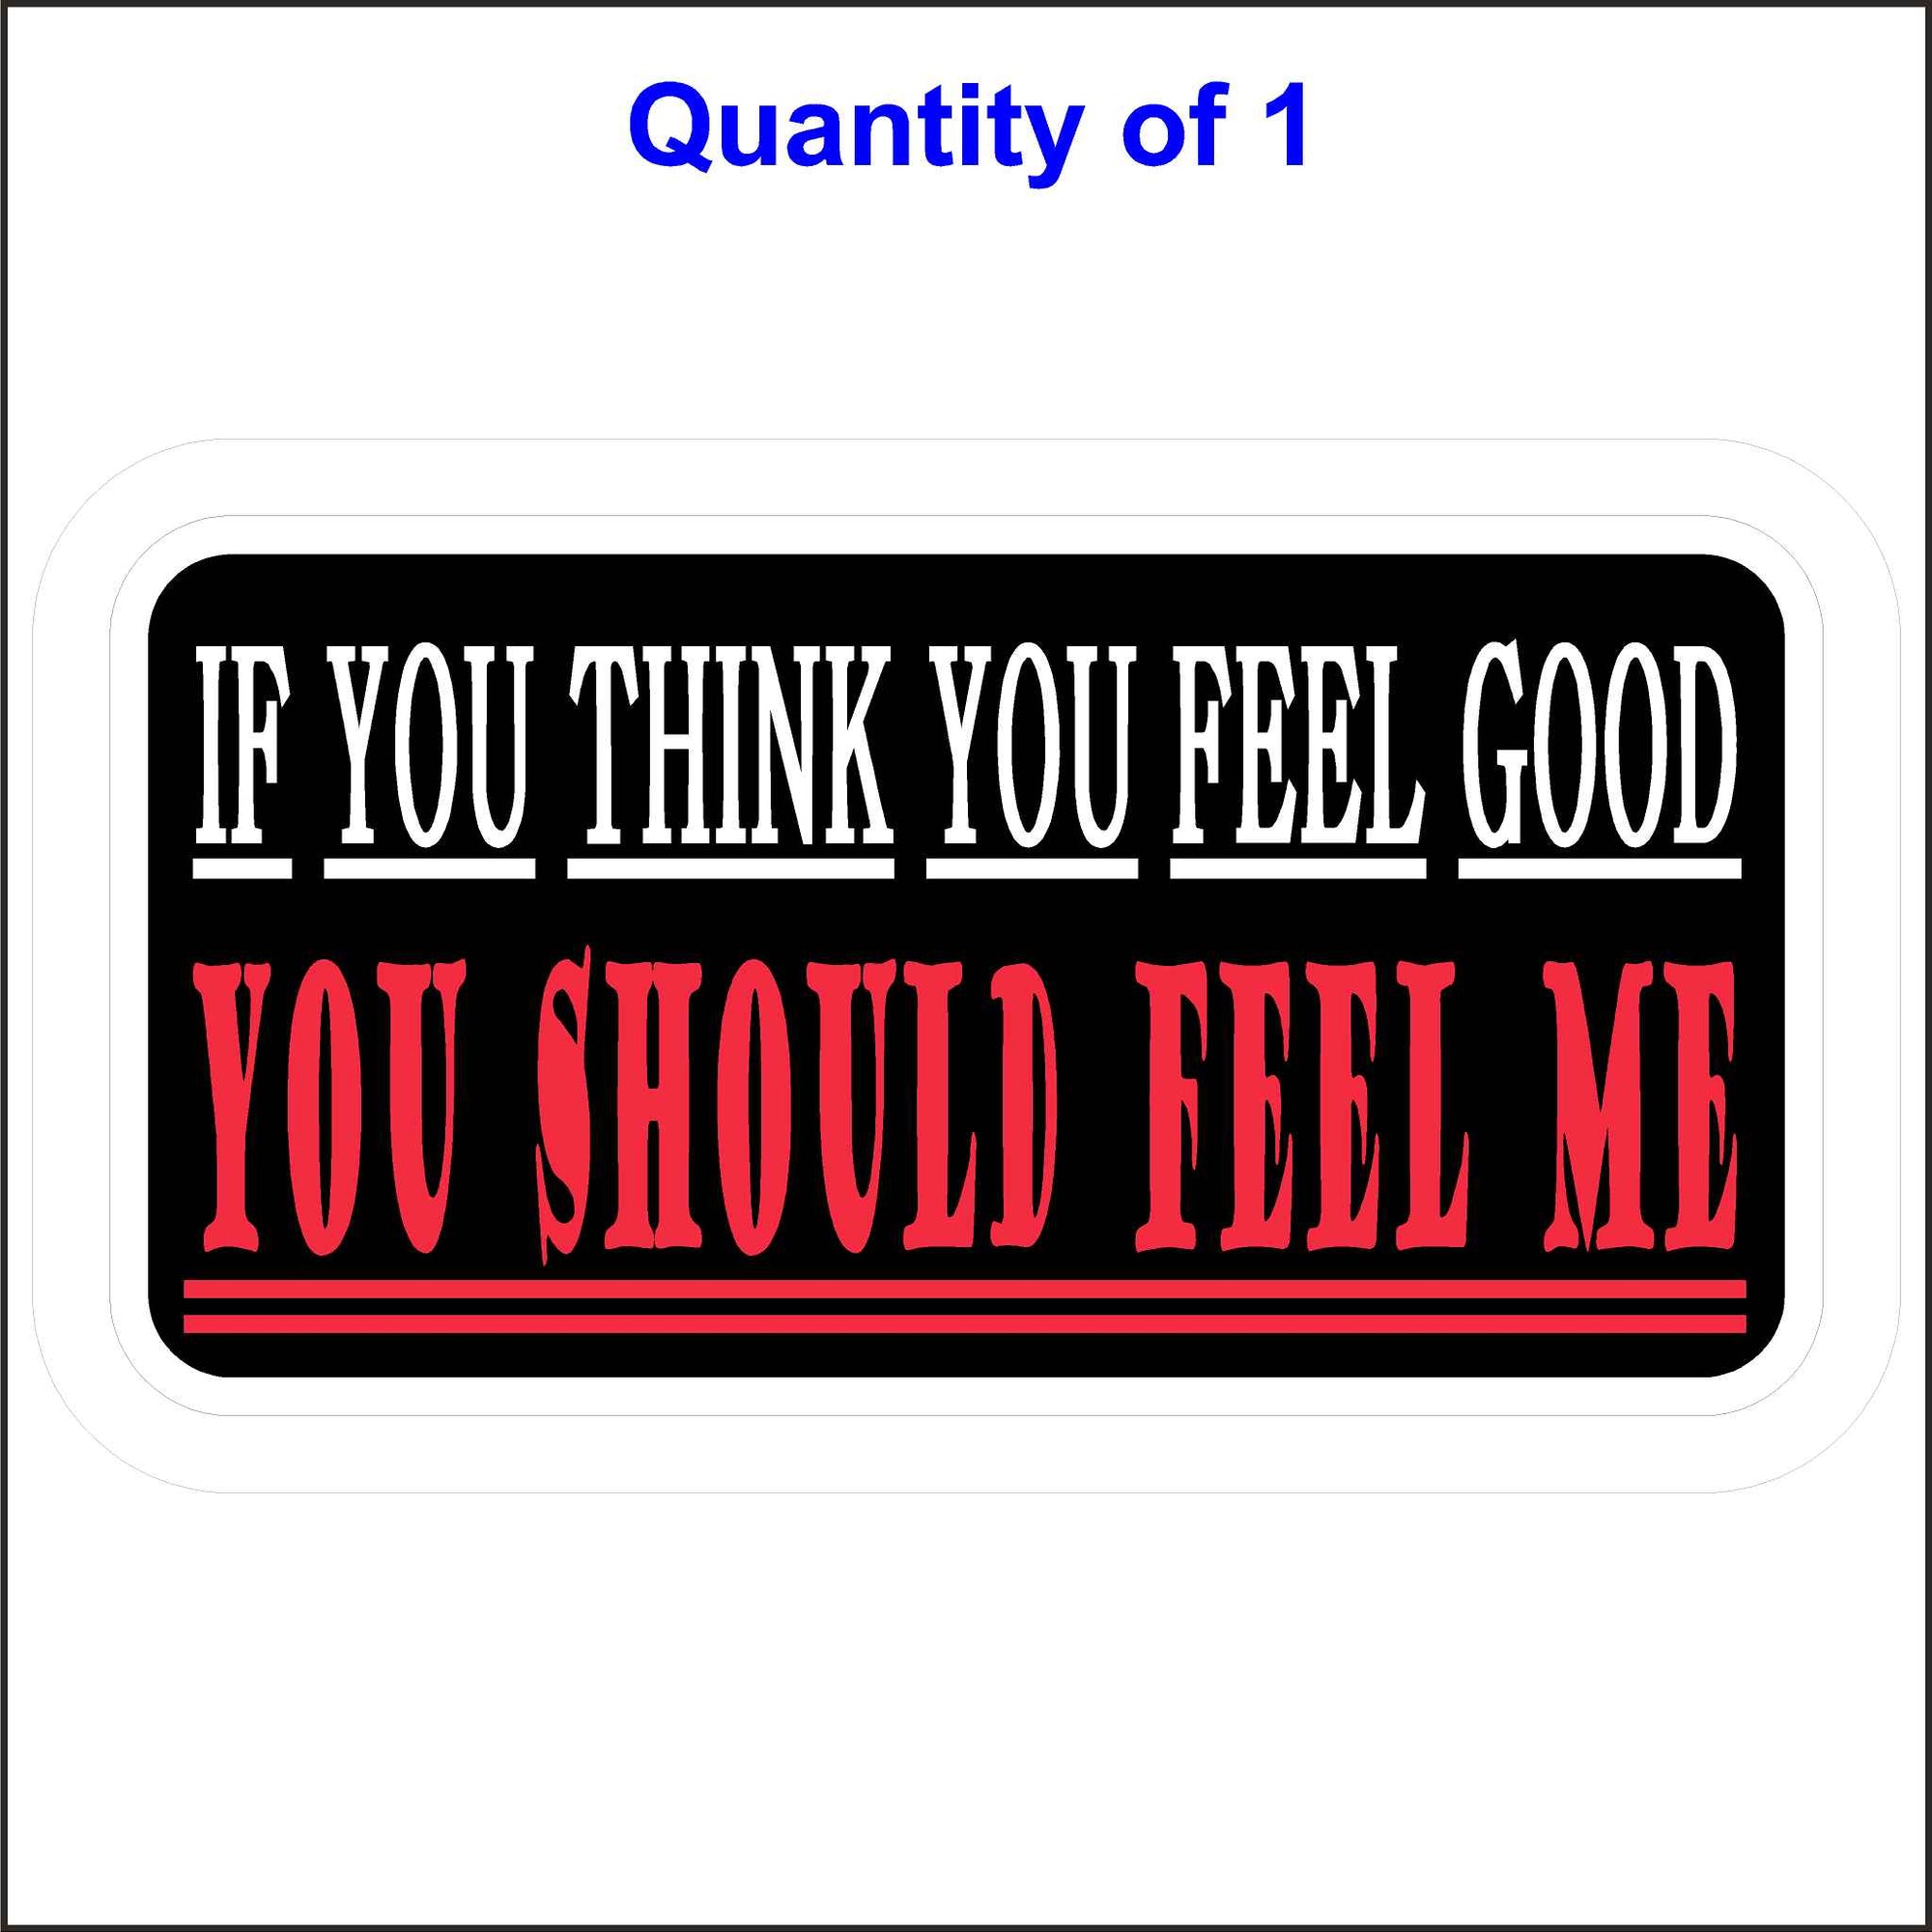 This, If You Think You Feel Good You Should Feel Me Sticker, Is Printed in White and Red on a Black Background.